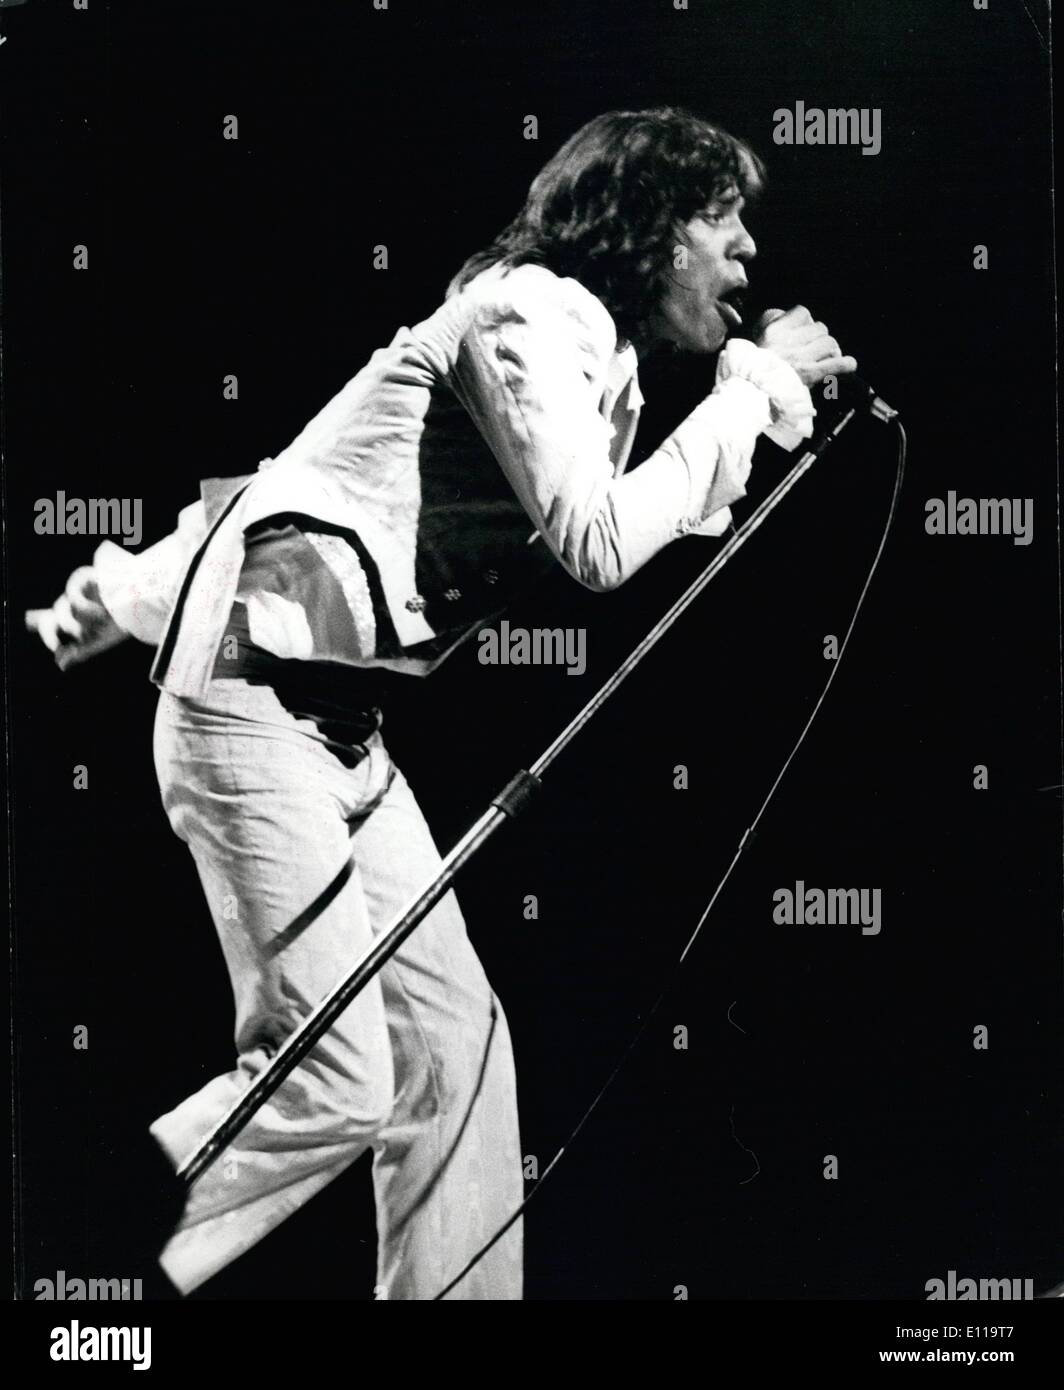 May 05, 1976 - The Rolling Stones back in London: Last night one of the greatest rock shows was brought back to London by the Rolling Stones. In front of 17,000 fans at Earl's Court with 90 minutes of mind blowing music. Photo shows Mick Jagger the leader of the Rolling Stones seen during last nights performance. Stock Photo